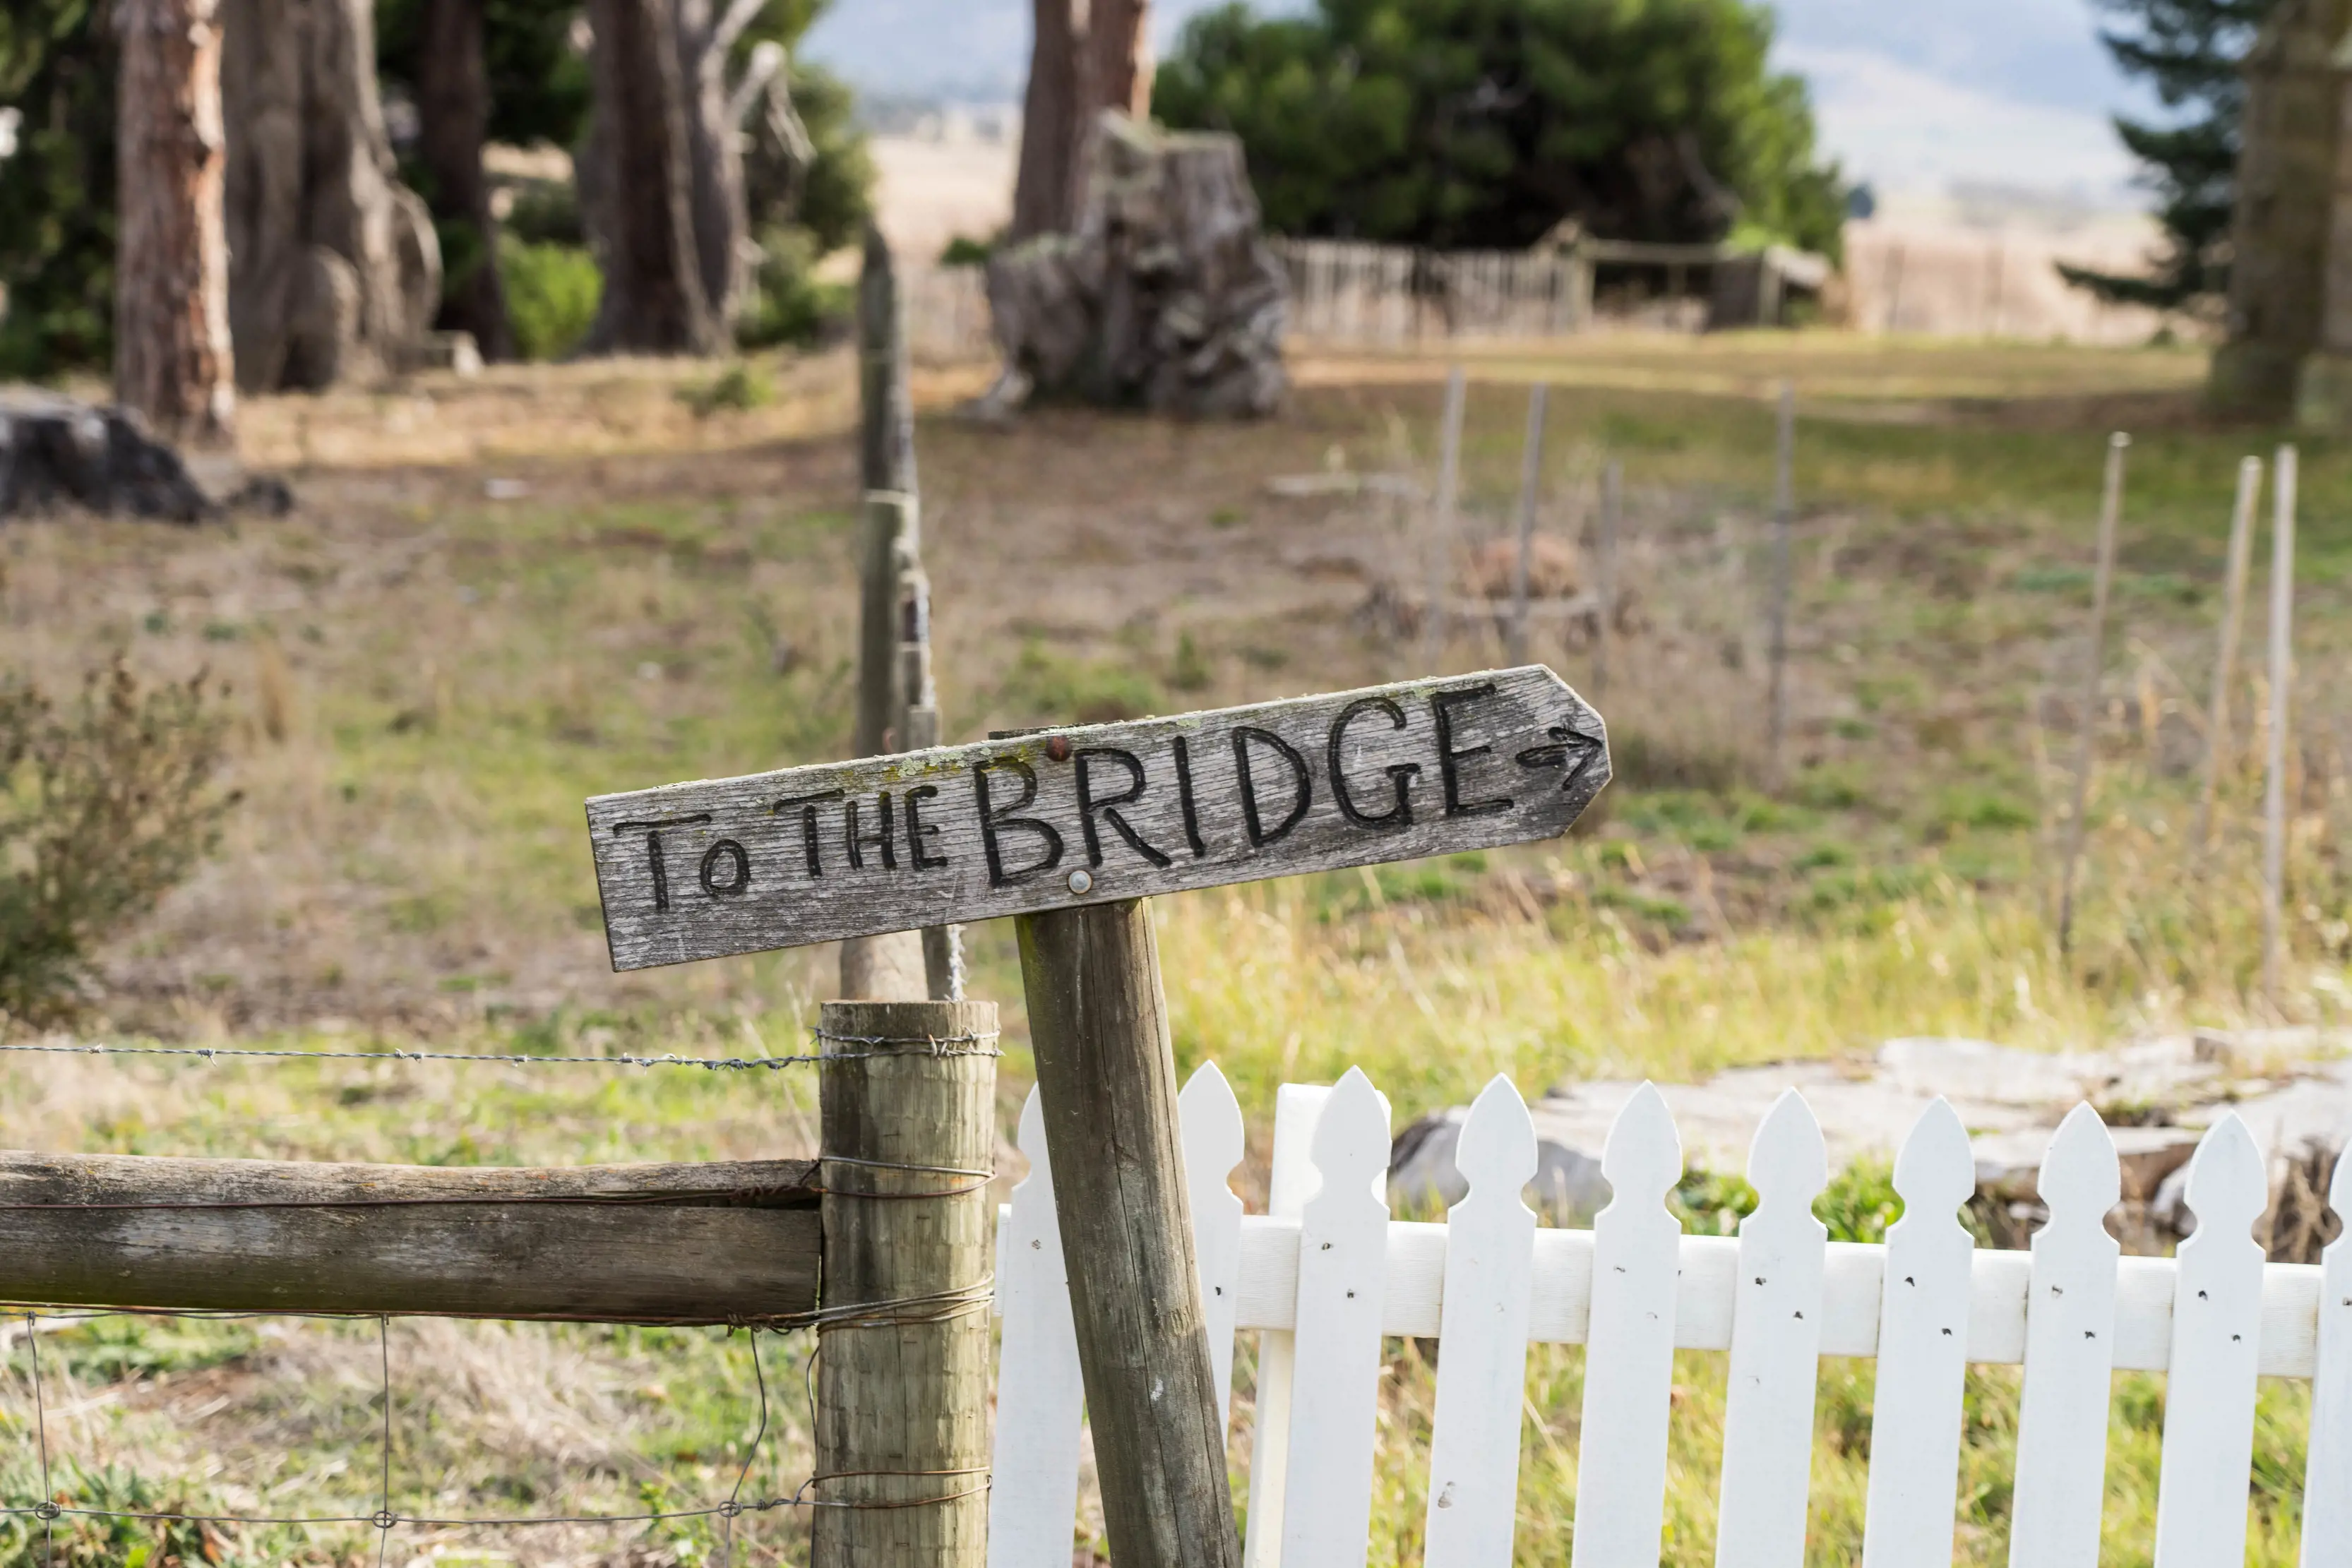 To the Bridge is written on a wooden sign with an arrow pointing towards the brigde at Ross